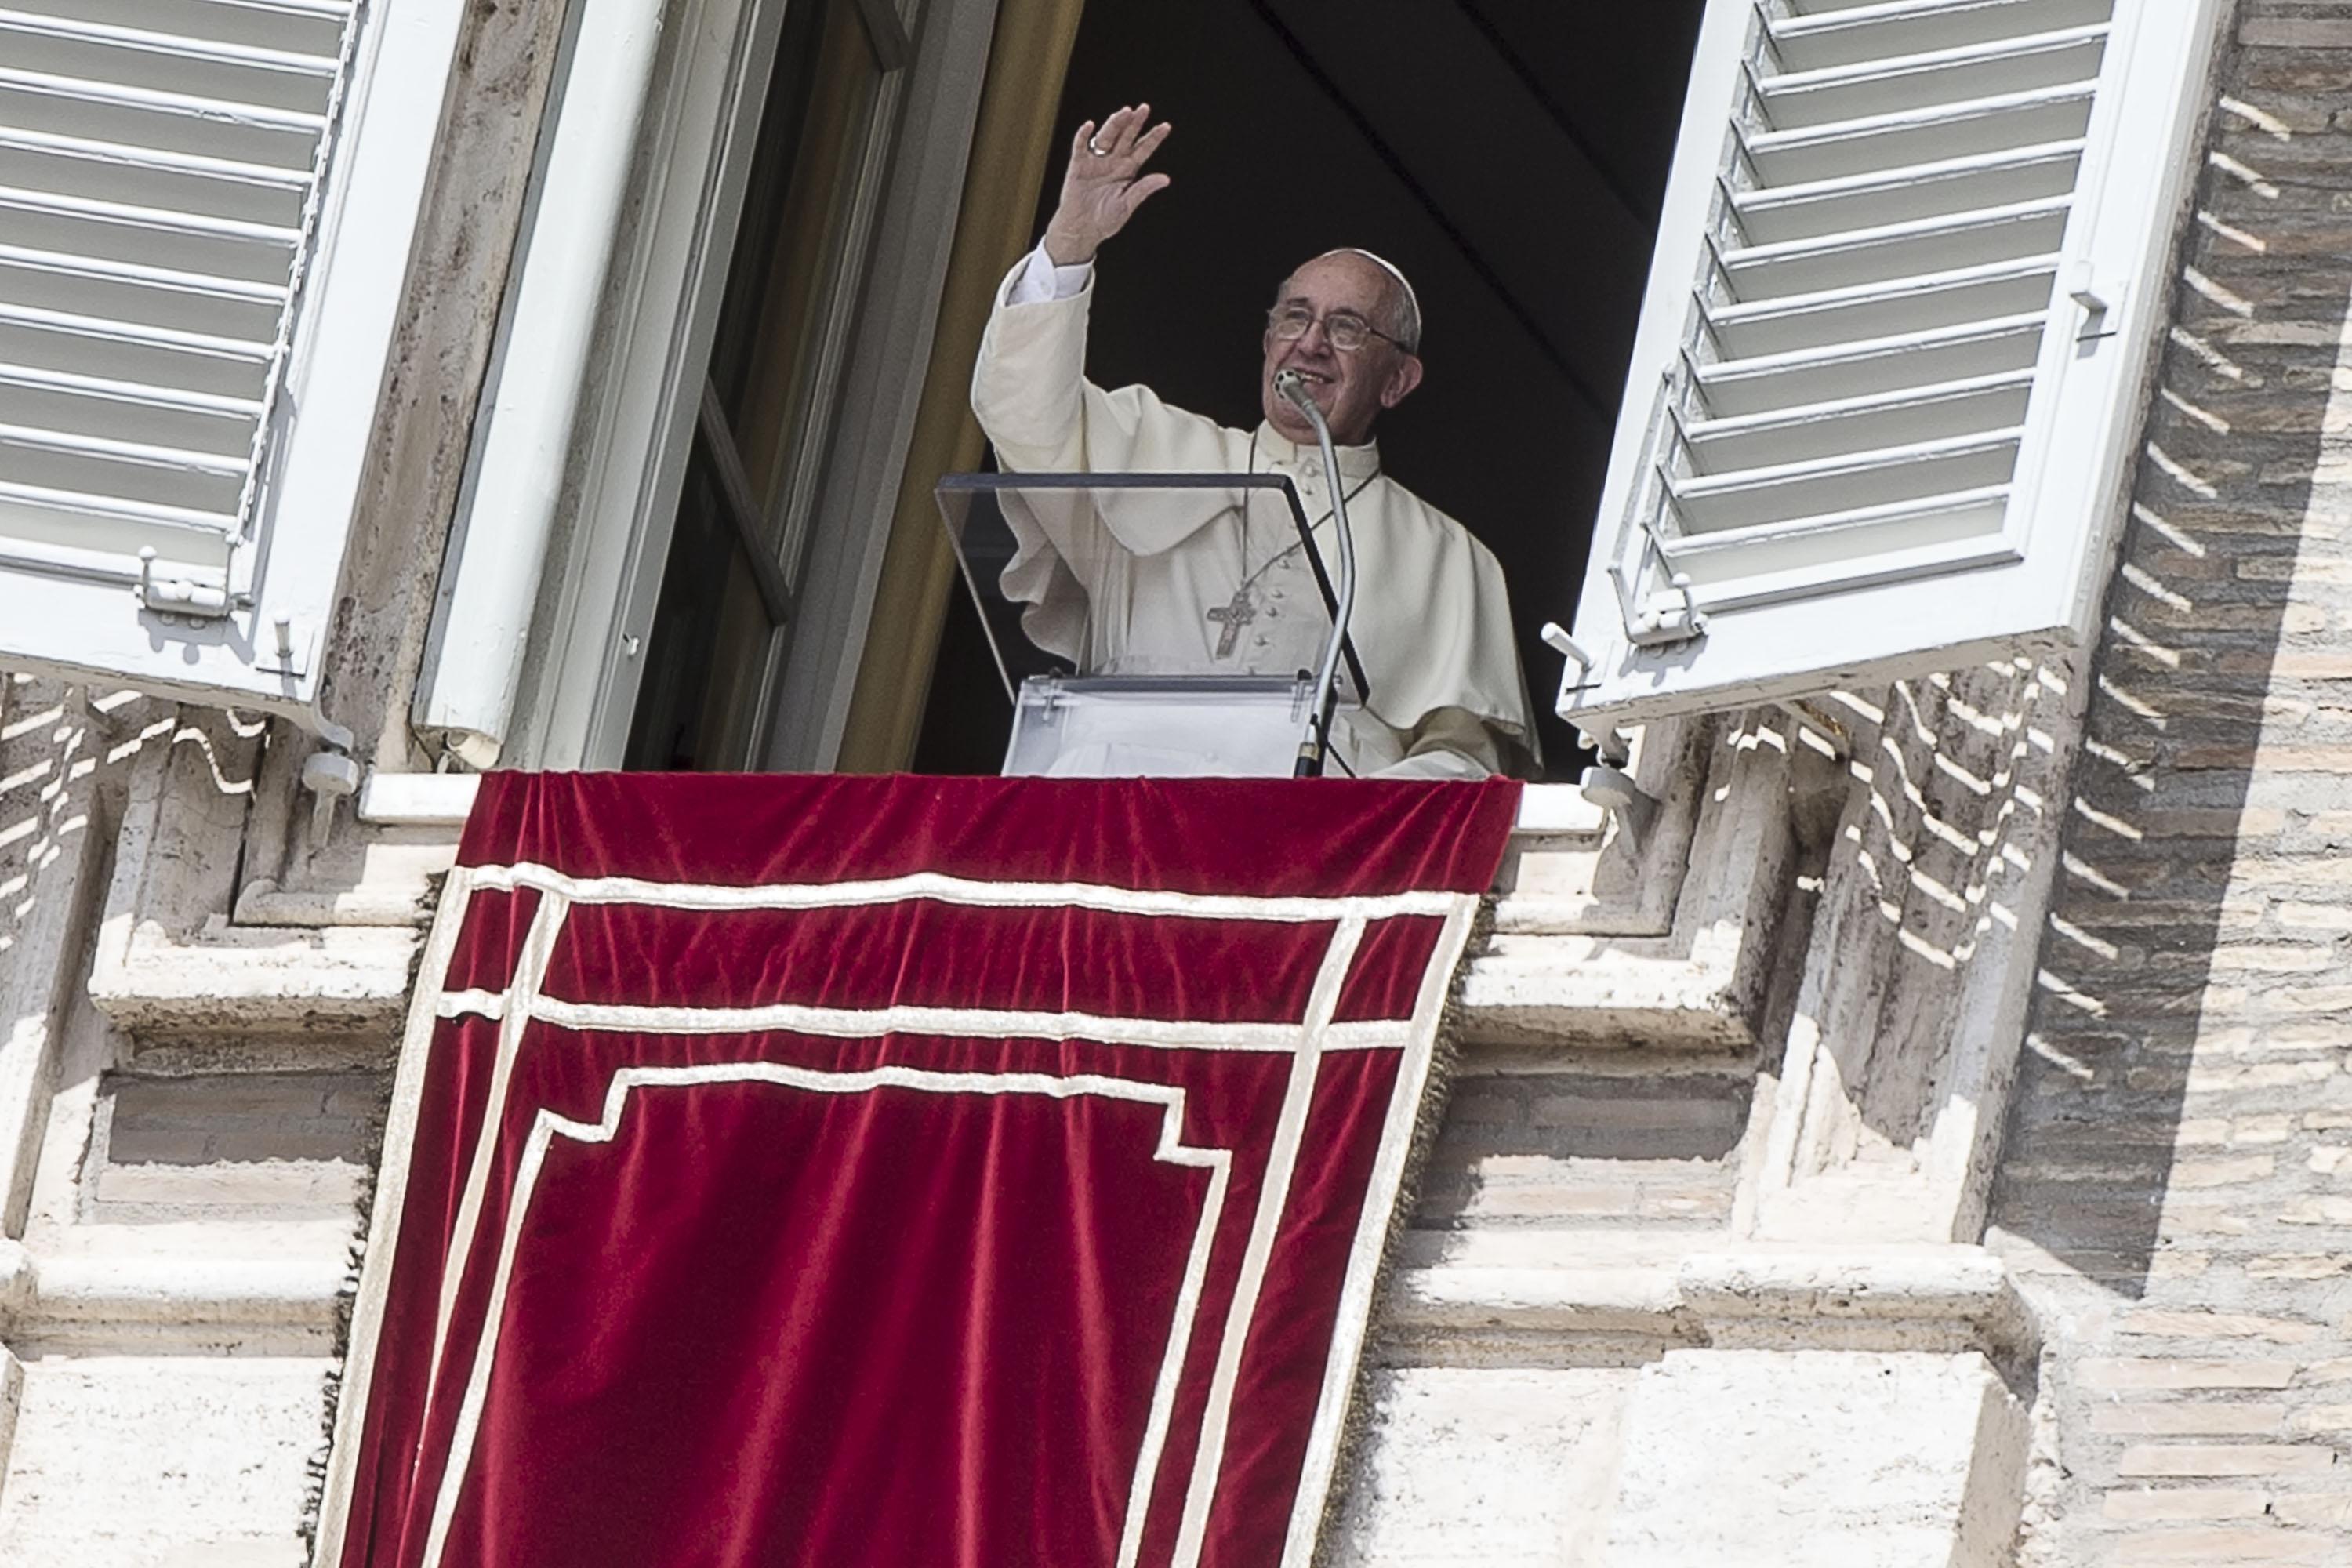 Pope Francis greets faithful during the Angelus prayer in St. Peter's Square